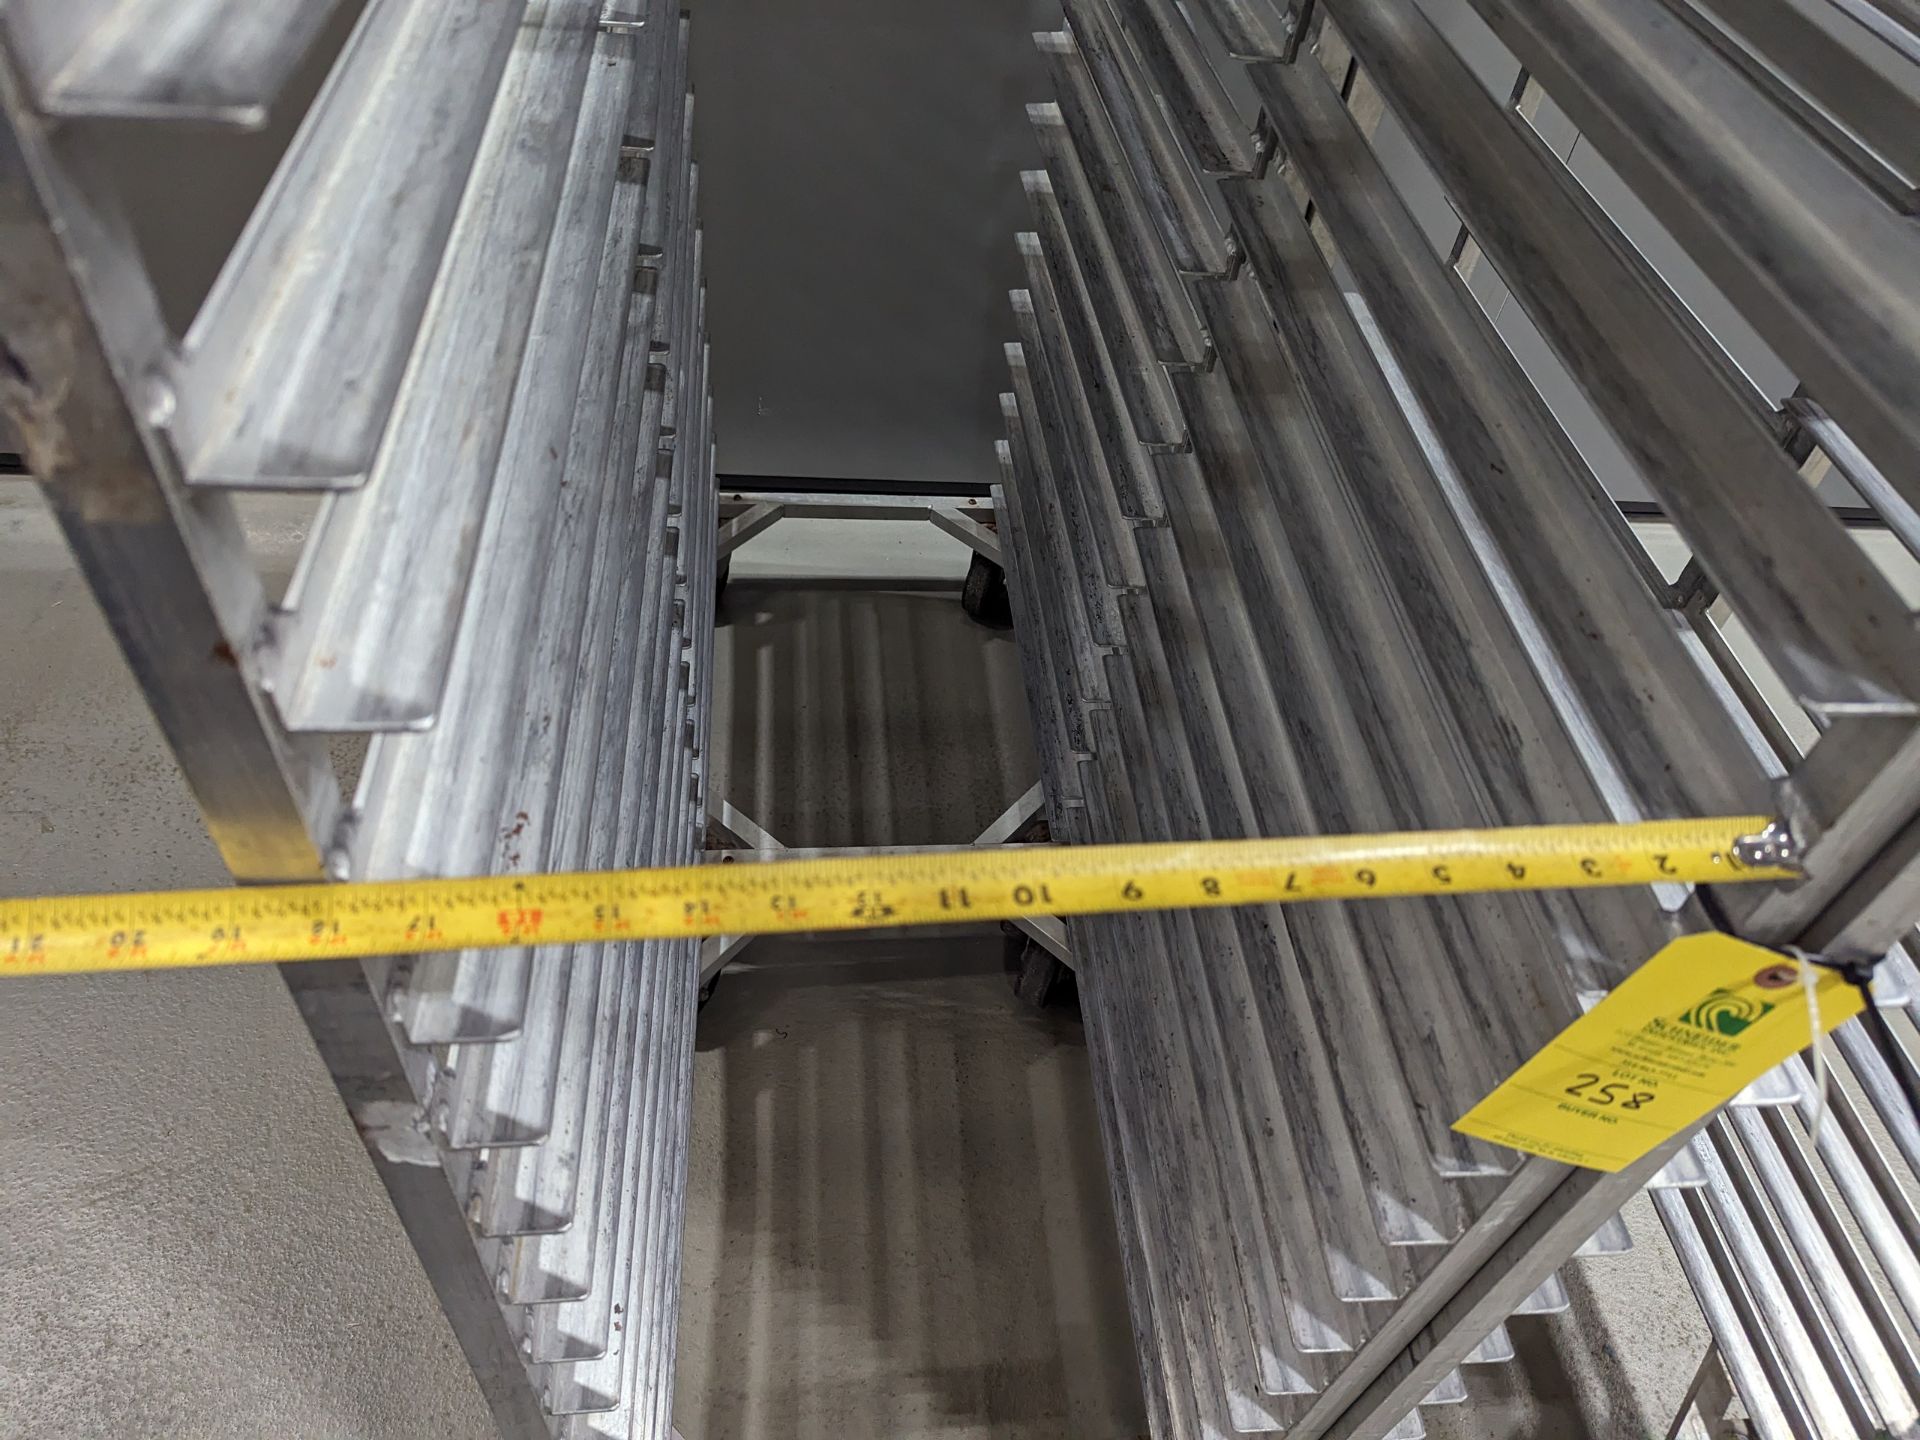 Lot of 4 Single Wide Aluminum Bakery Racks, Dimensions LxWxH: 53x41x69 Measurements are for lot of - Image 5 of 6